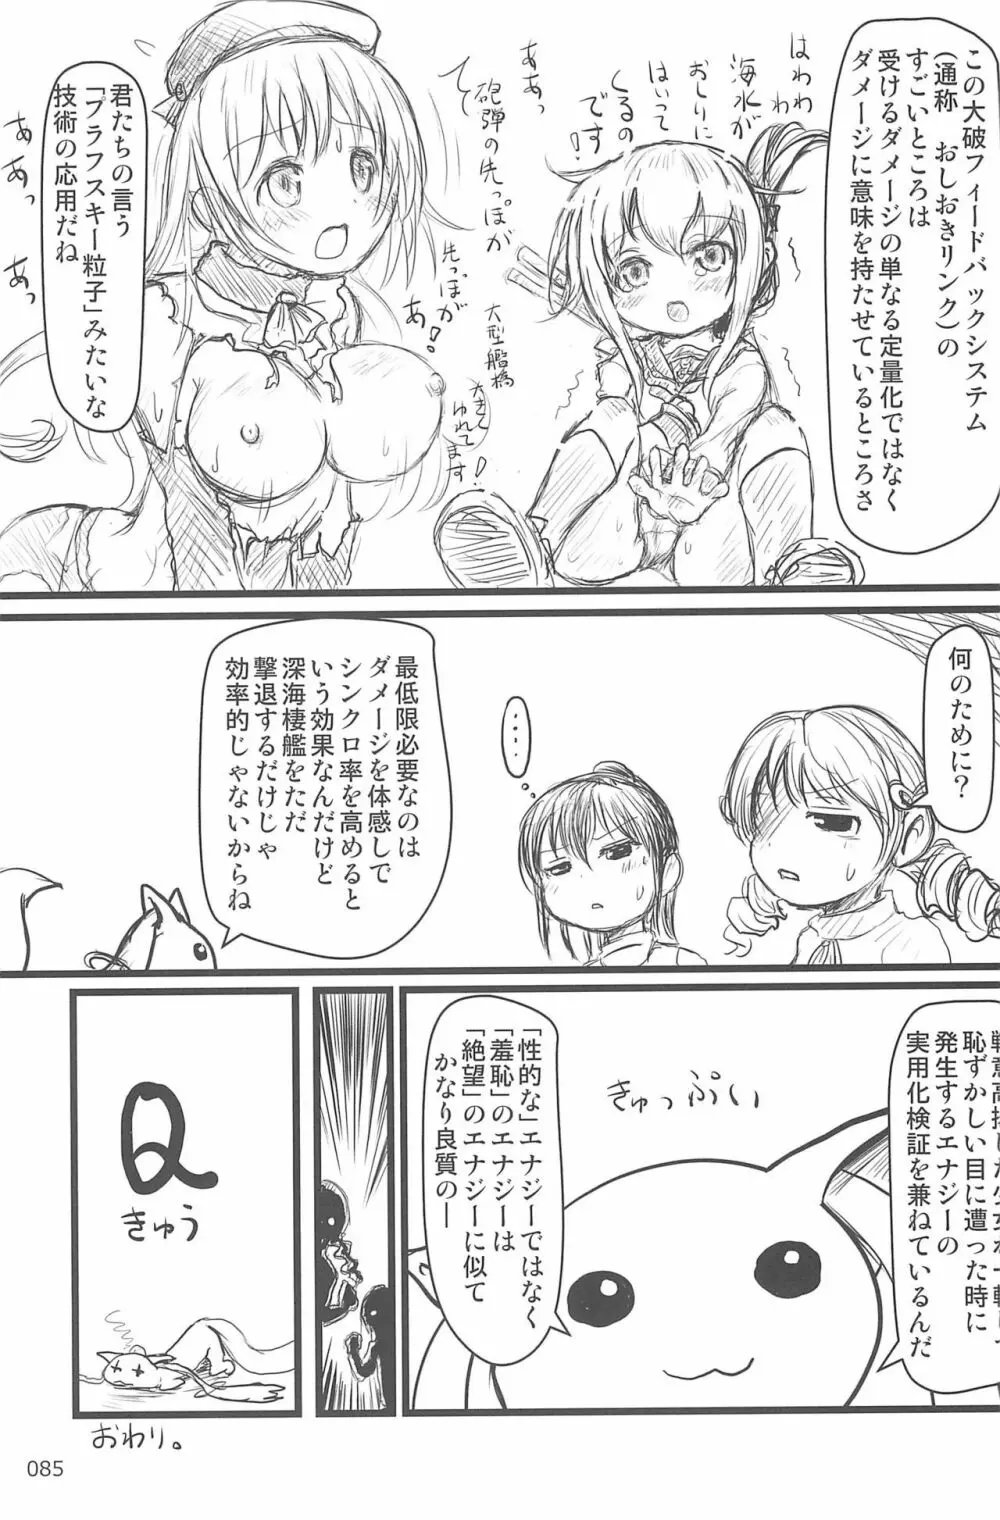 ND-special Volume 6 85ページ